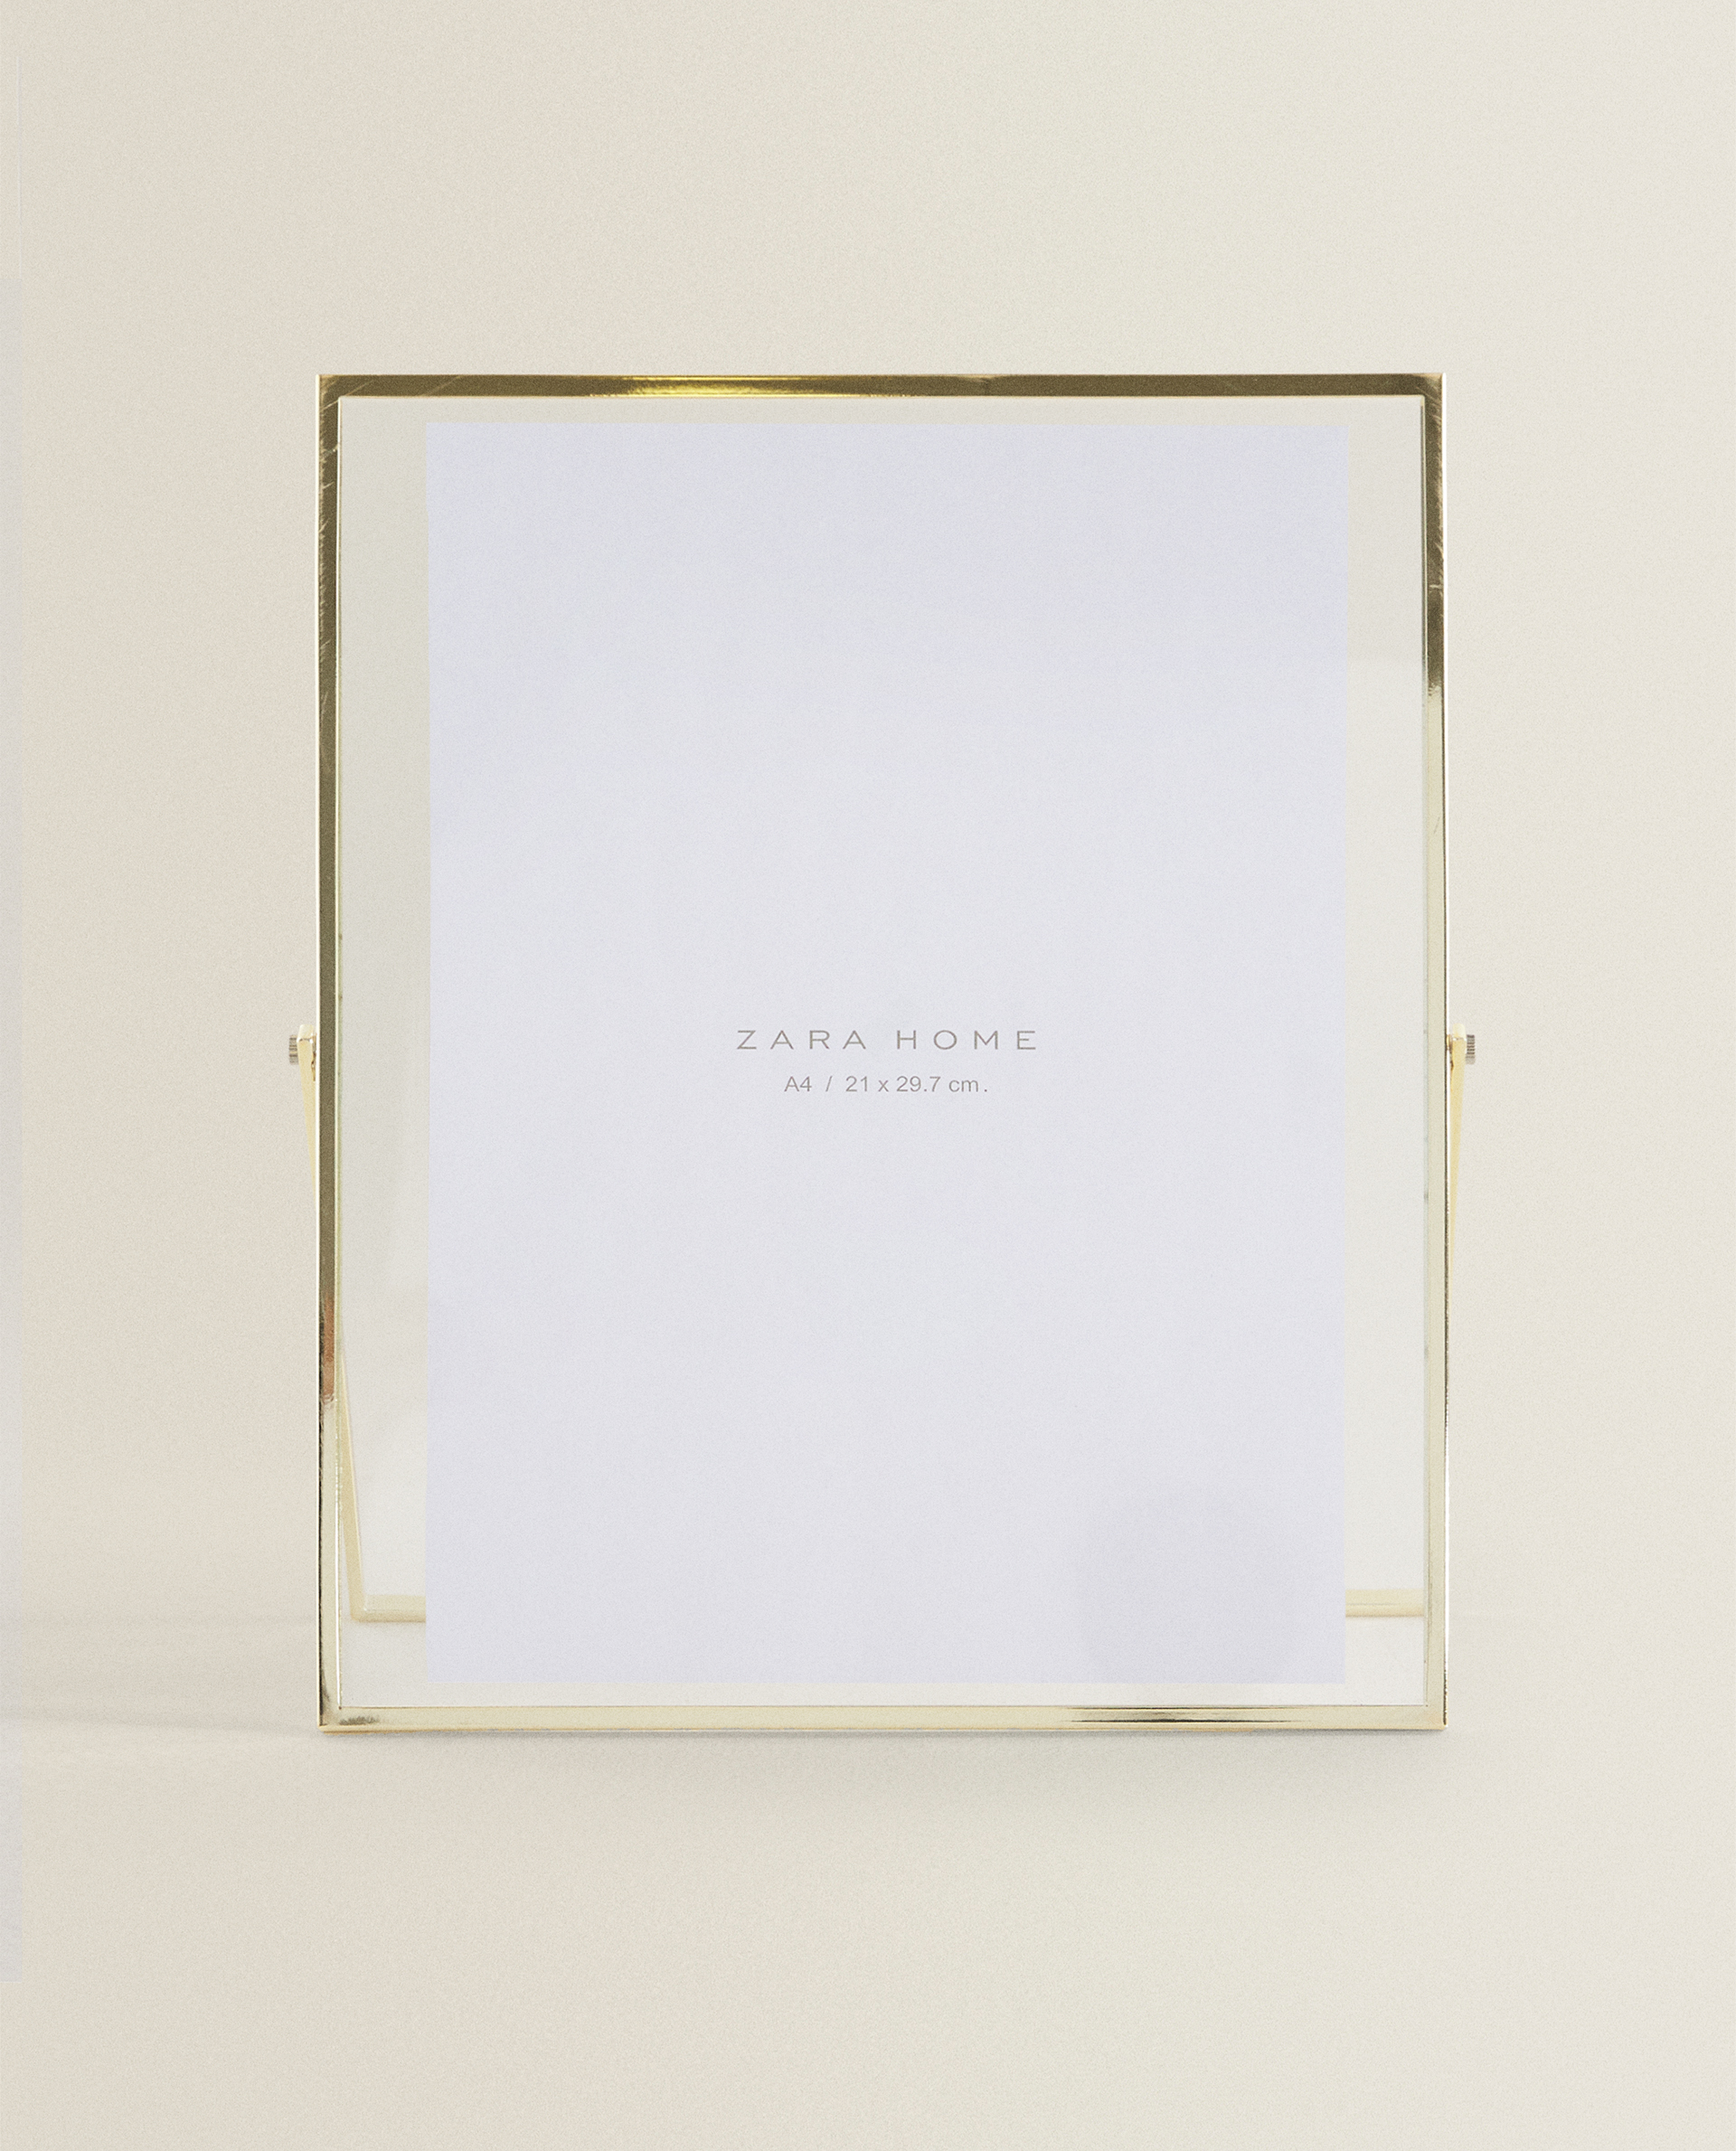 GOLD FRAME WITH STAND - Photo frames 